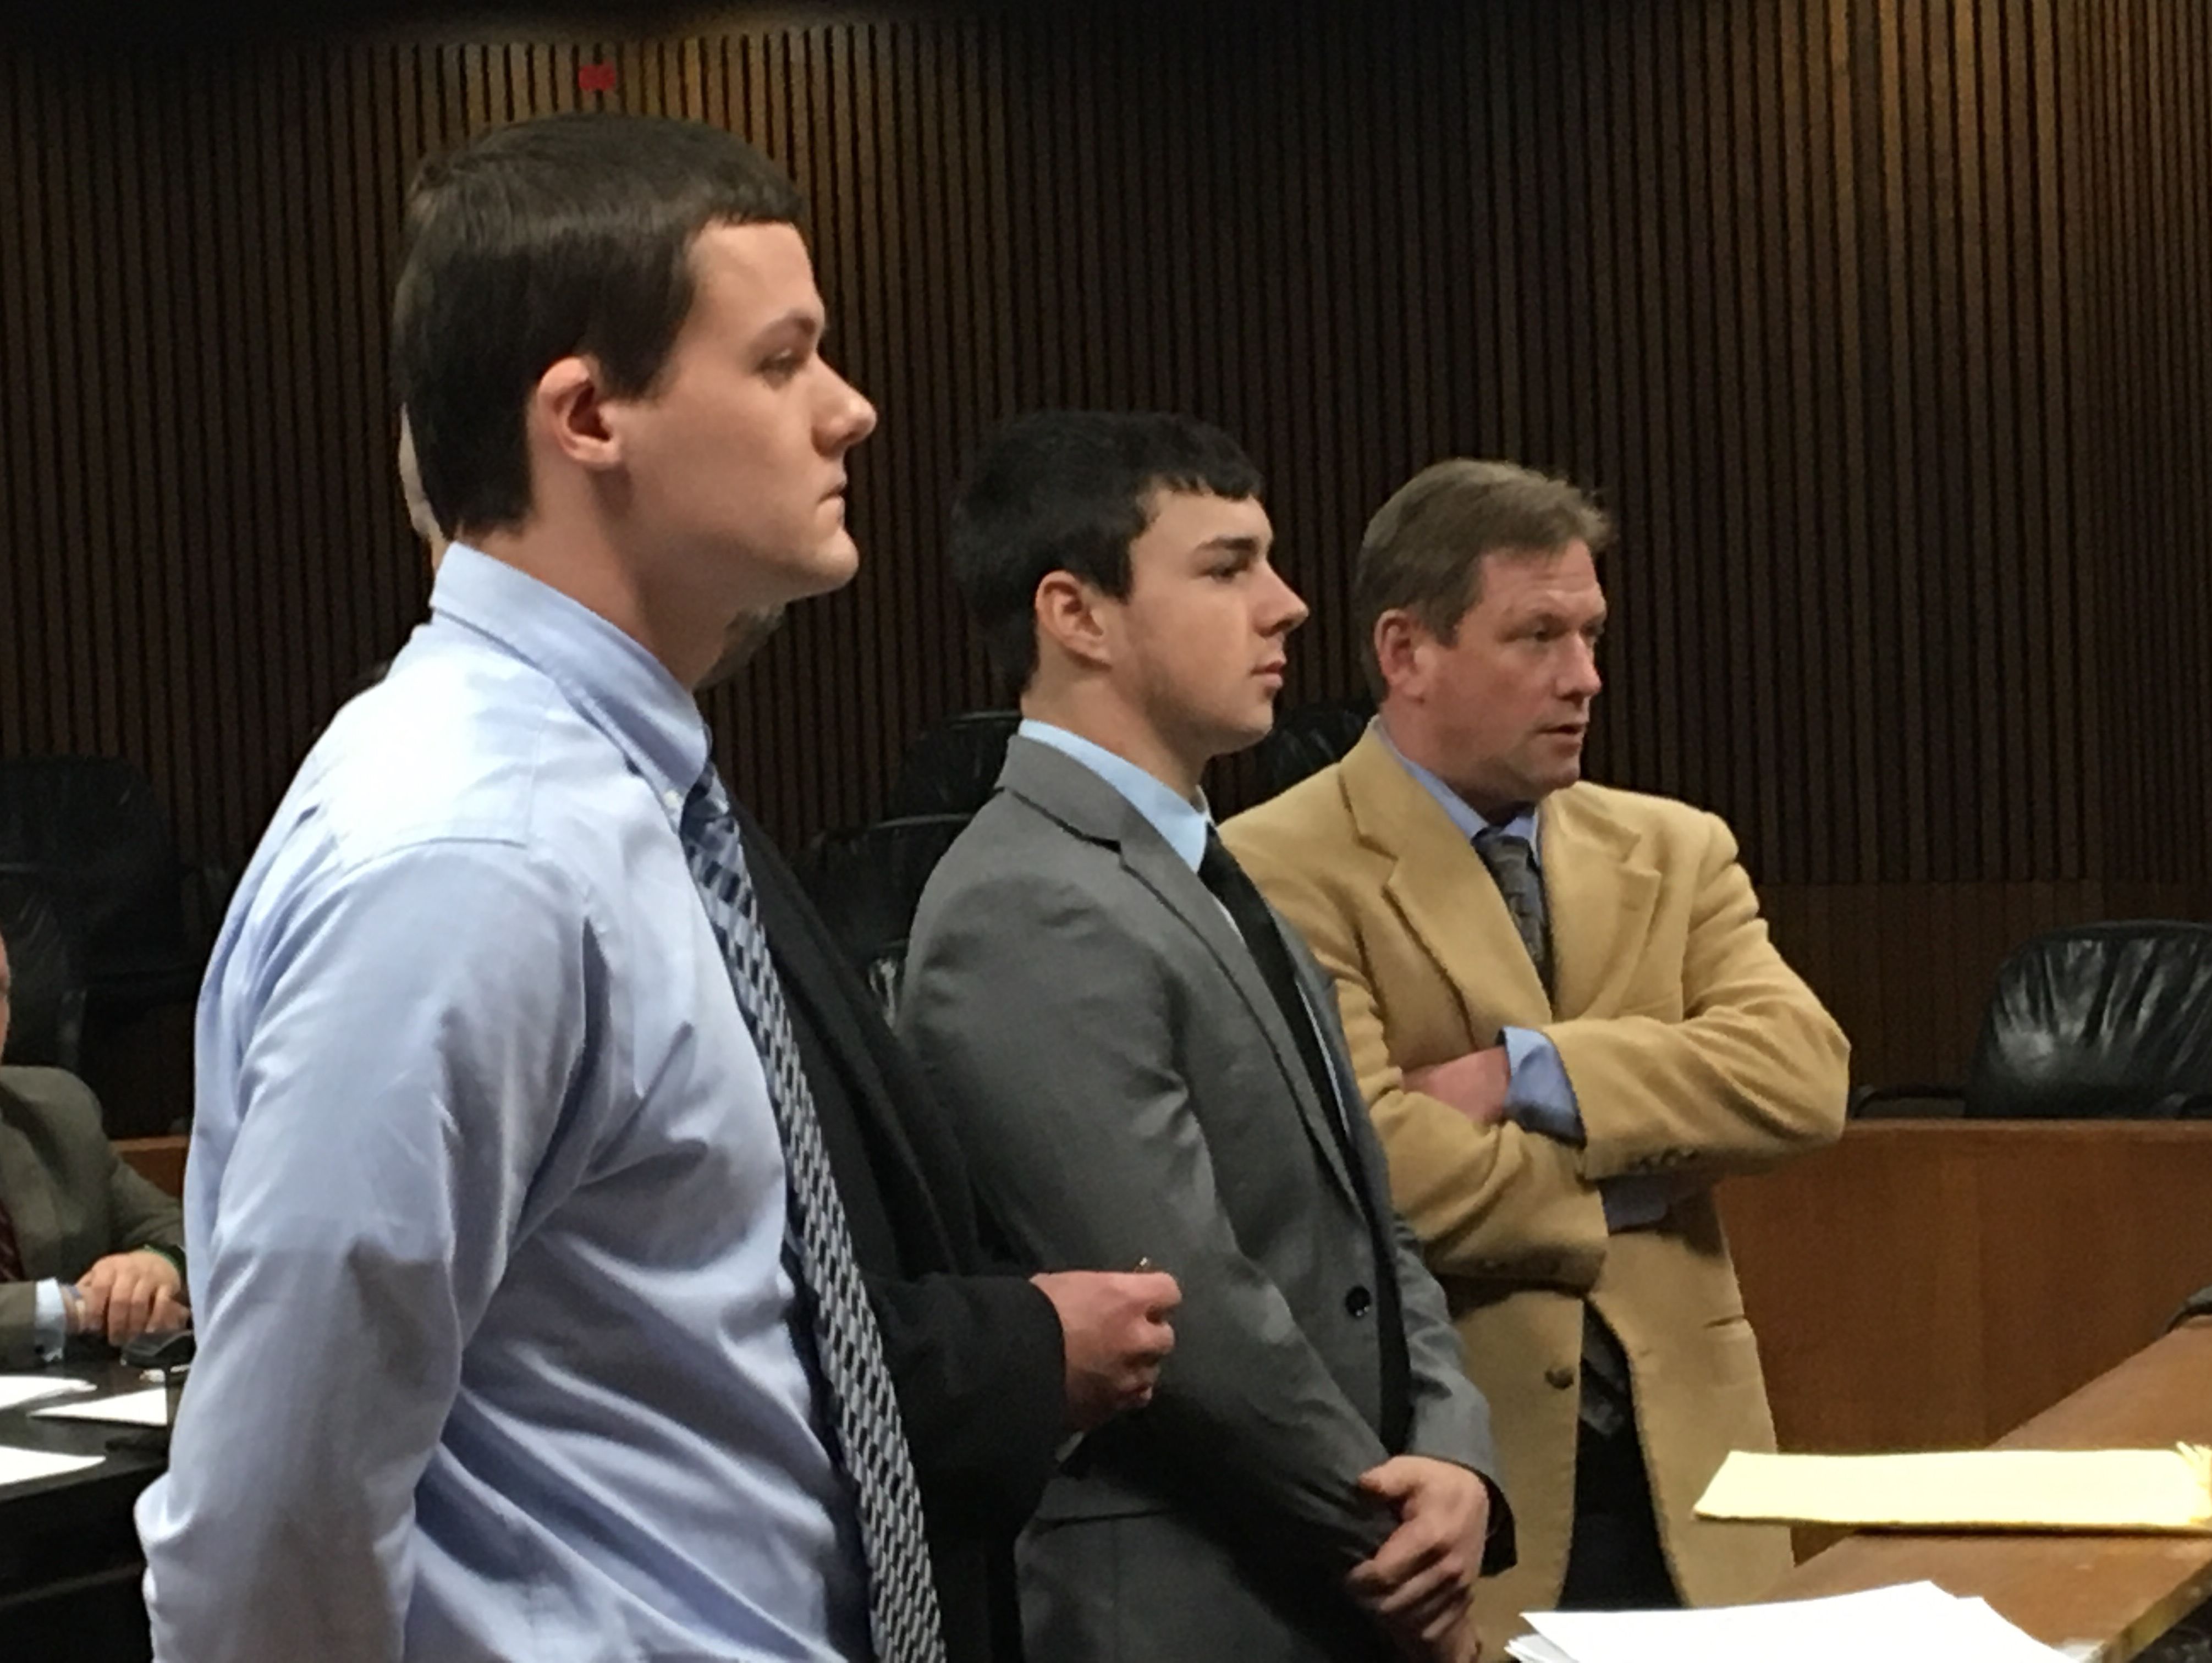 Michael Roth, 18, and Tanner Coolsaet, 19, of Grosse Ile appear Wednesday Jan. 11, 2016 in Wayne County Circuit Court for sentencing in the killing/torturing of a Guinea pig last April. They're pictured here with attorney Edward Holmberg, right.